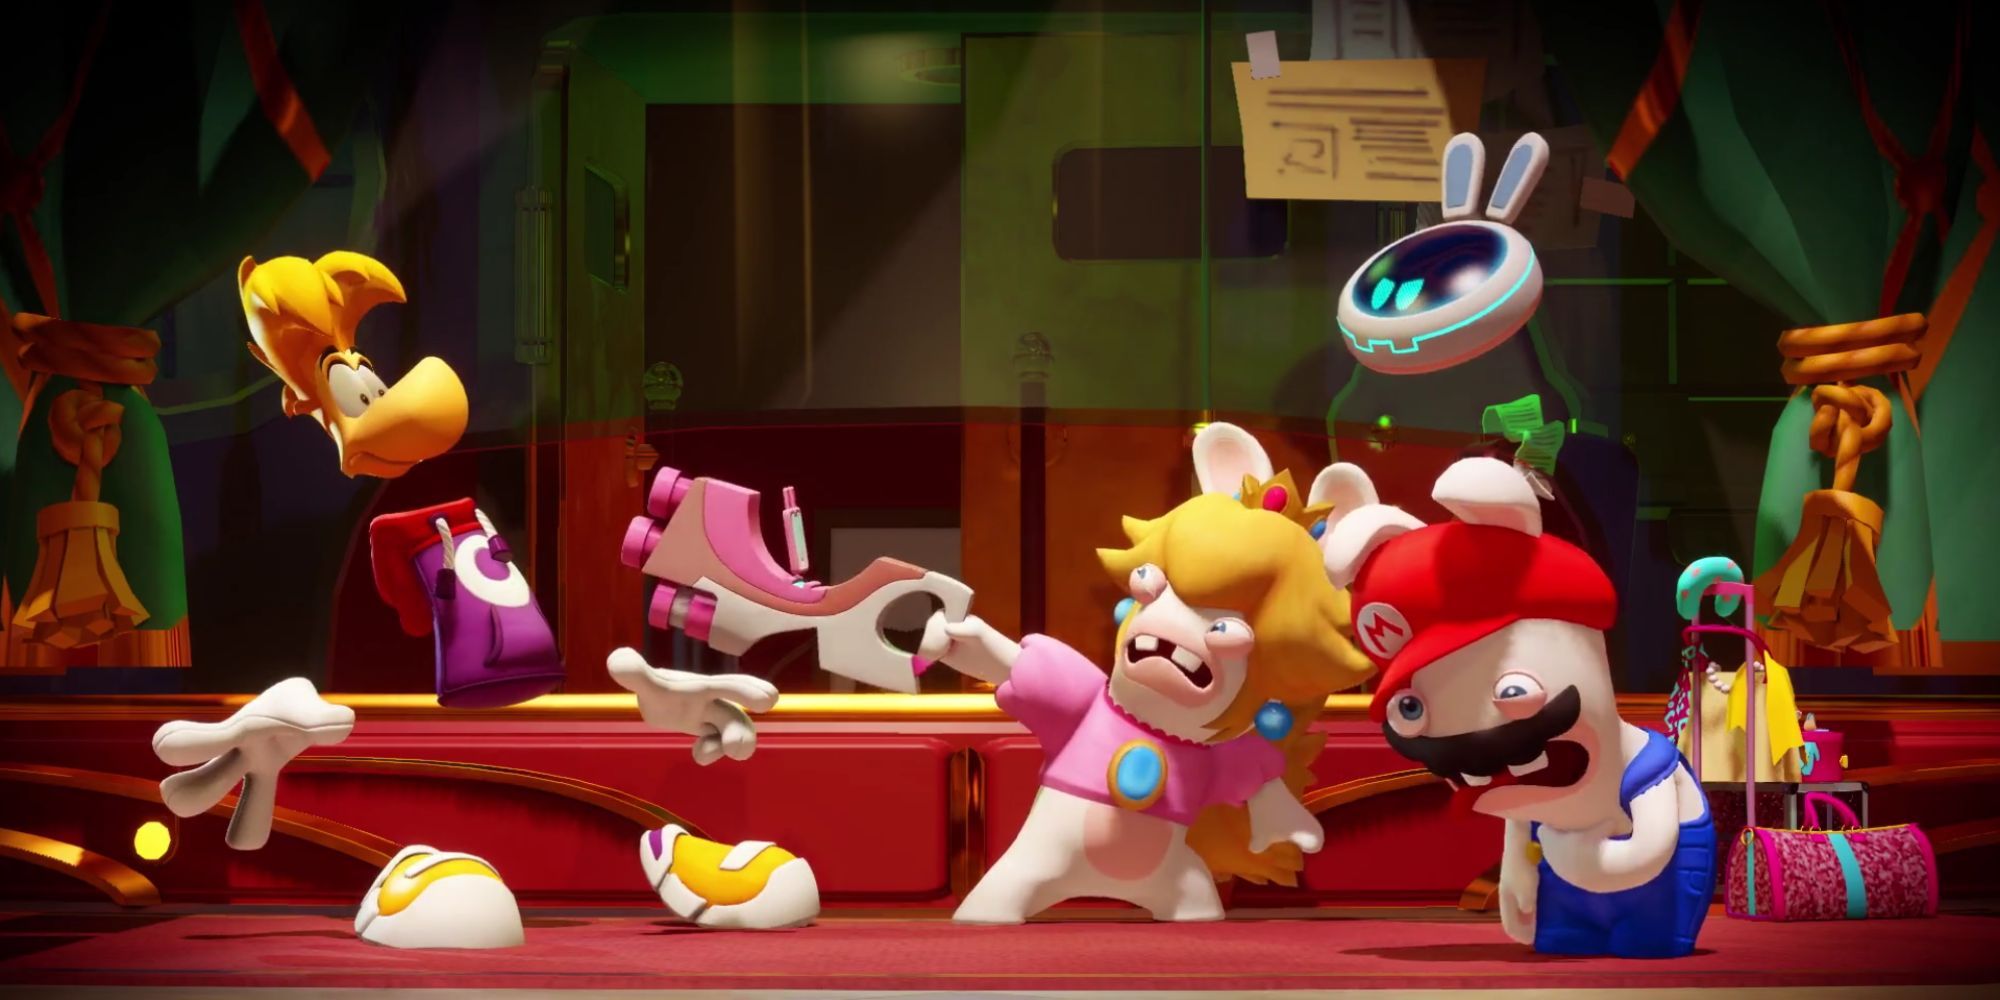 Mario + Rabbids Spark of Hope Will Have Three DLCs, One Focused on Rayman